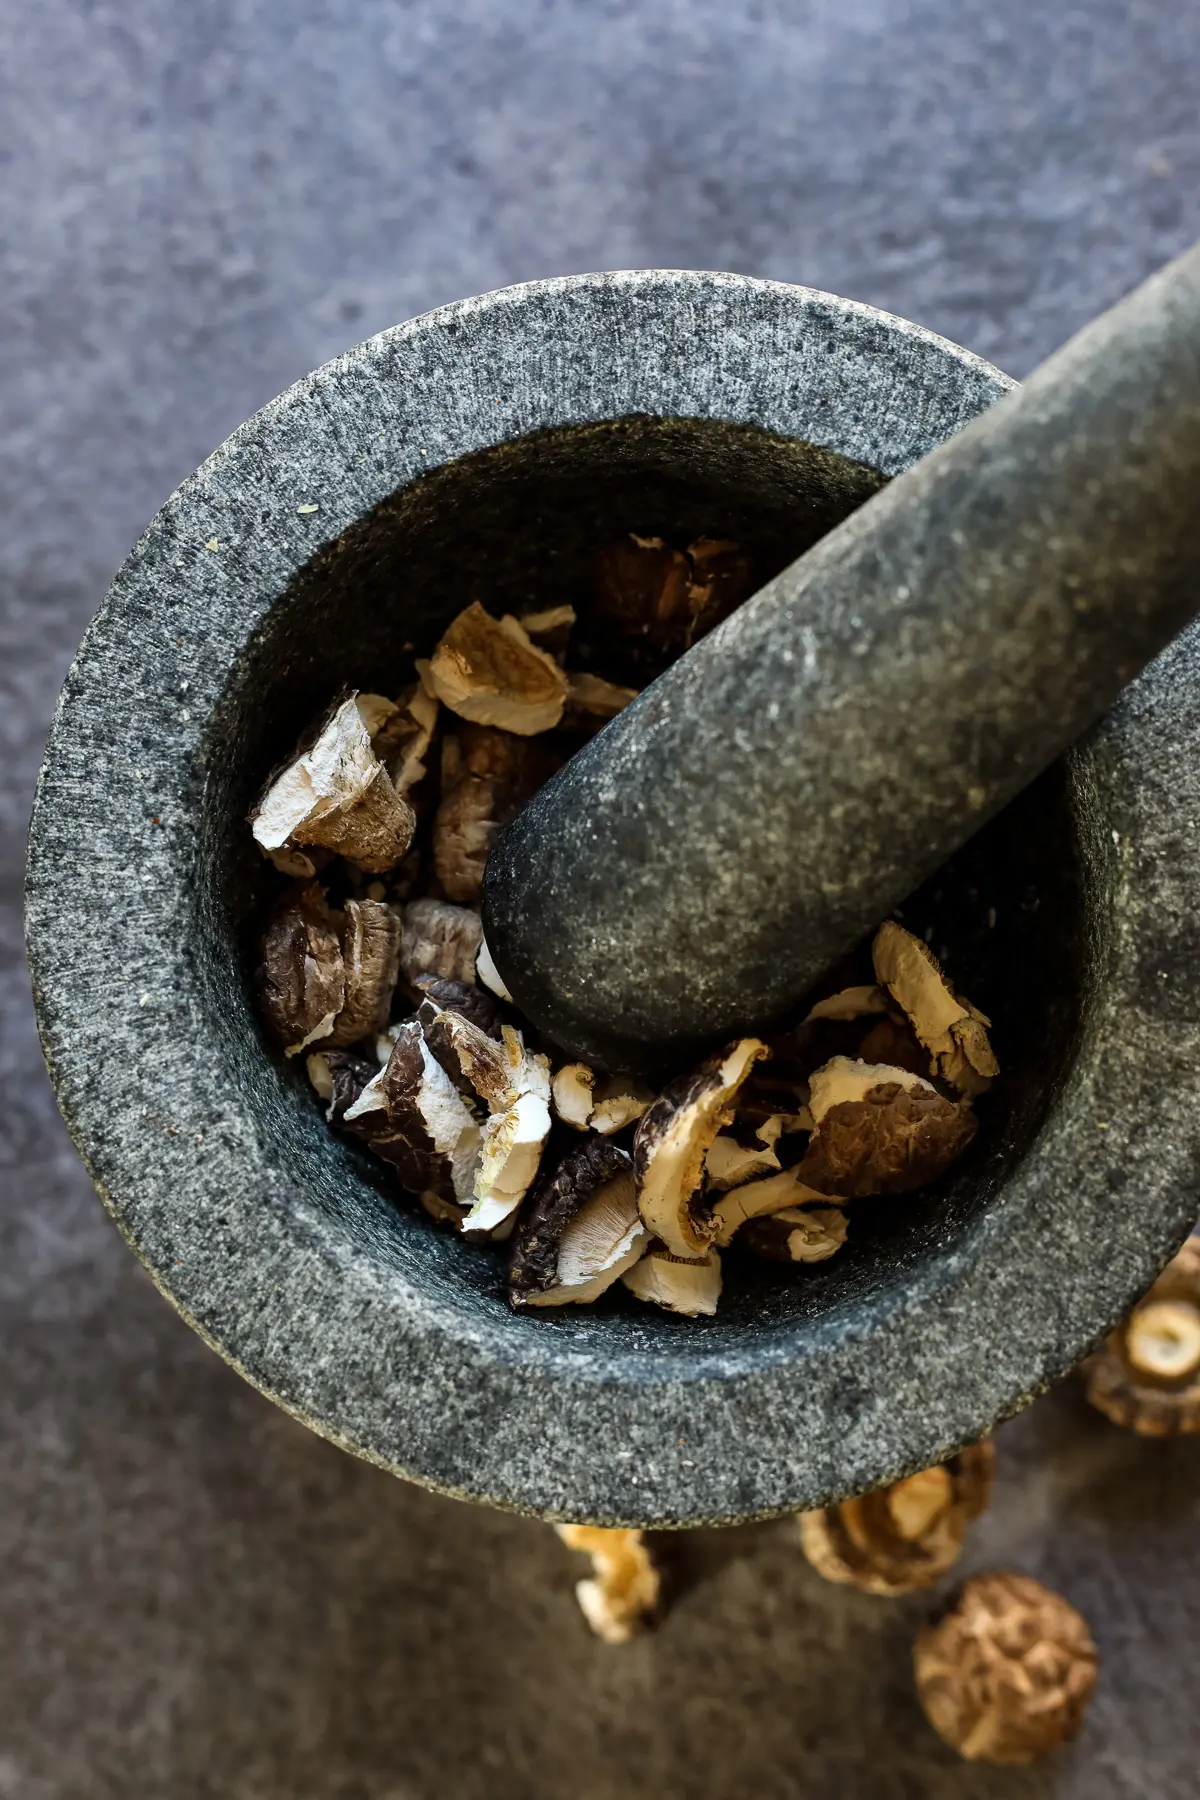 Breaking Dried Shiitake Mushrooms with a Mortar and Pestle.